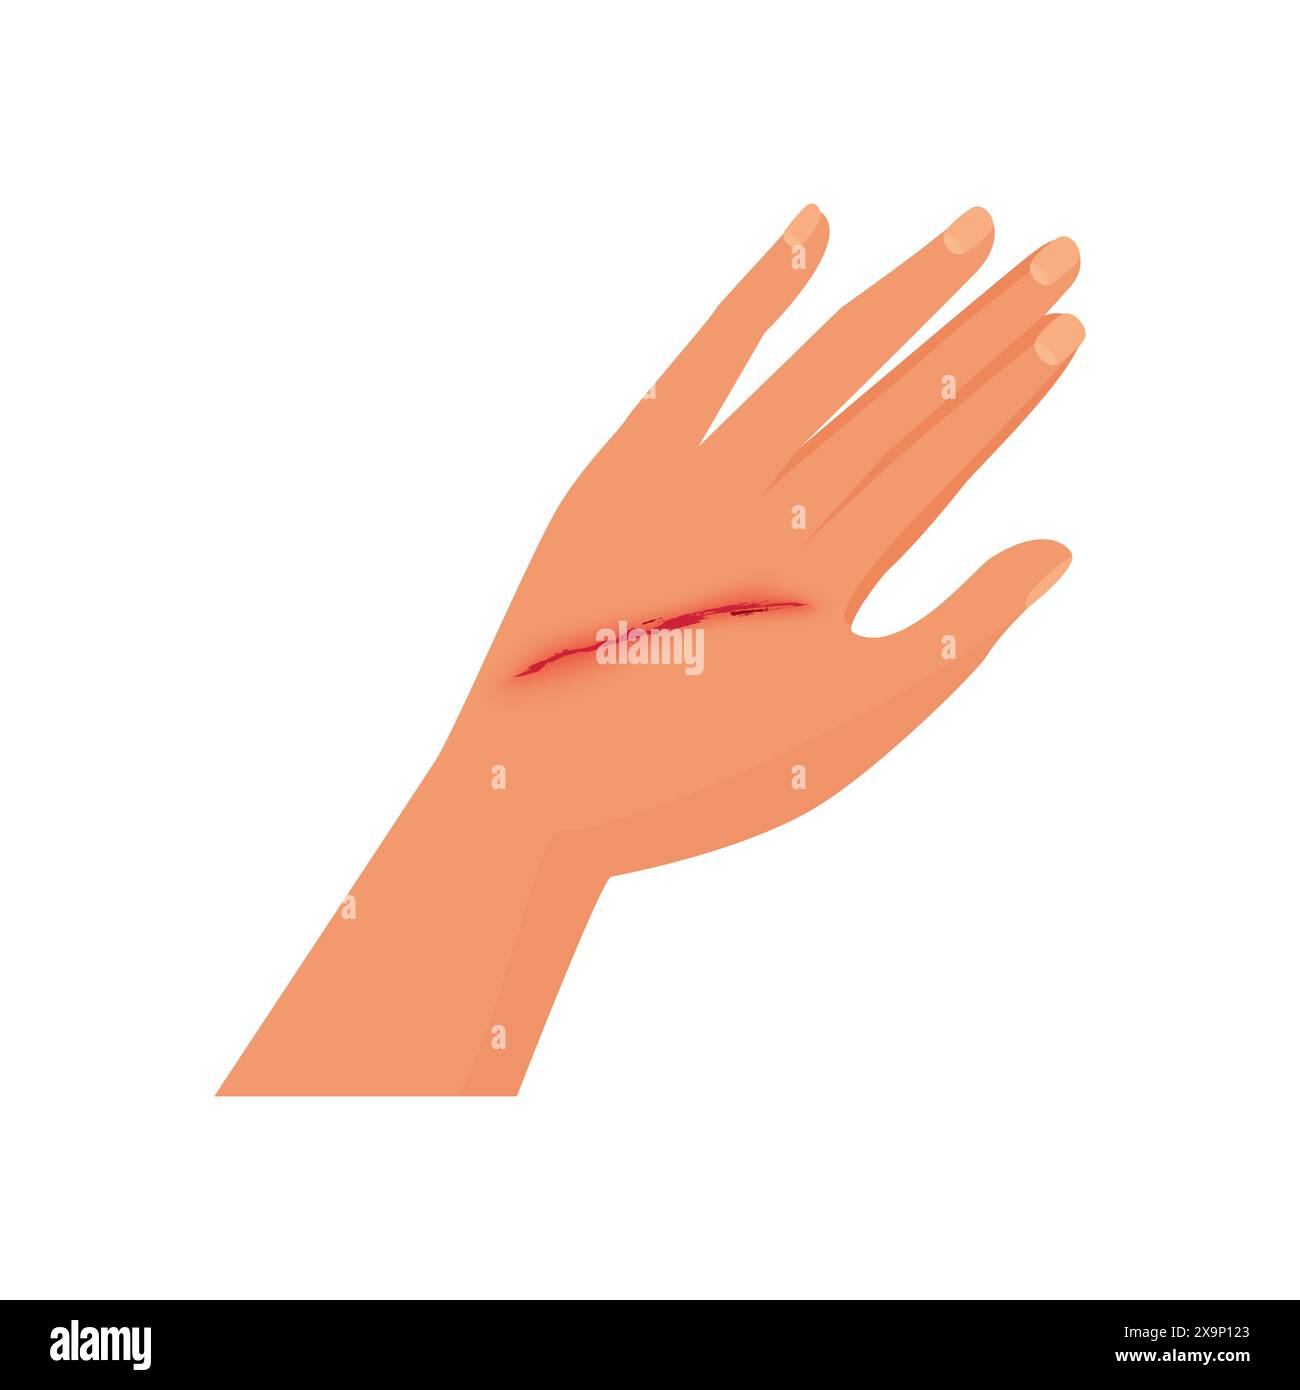 Injured human arm with trauma, open wound and blood on skin vector illustration Stock Vector